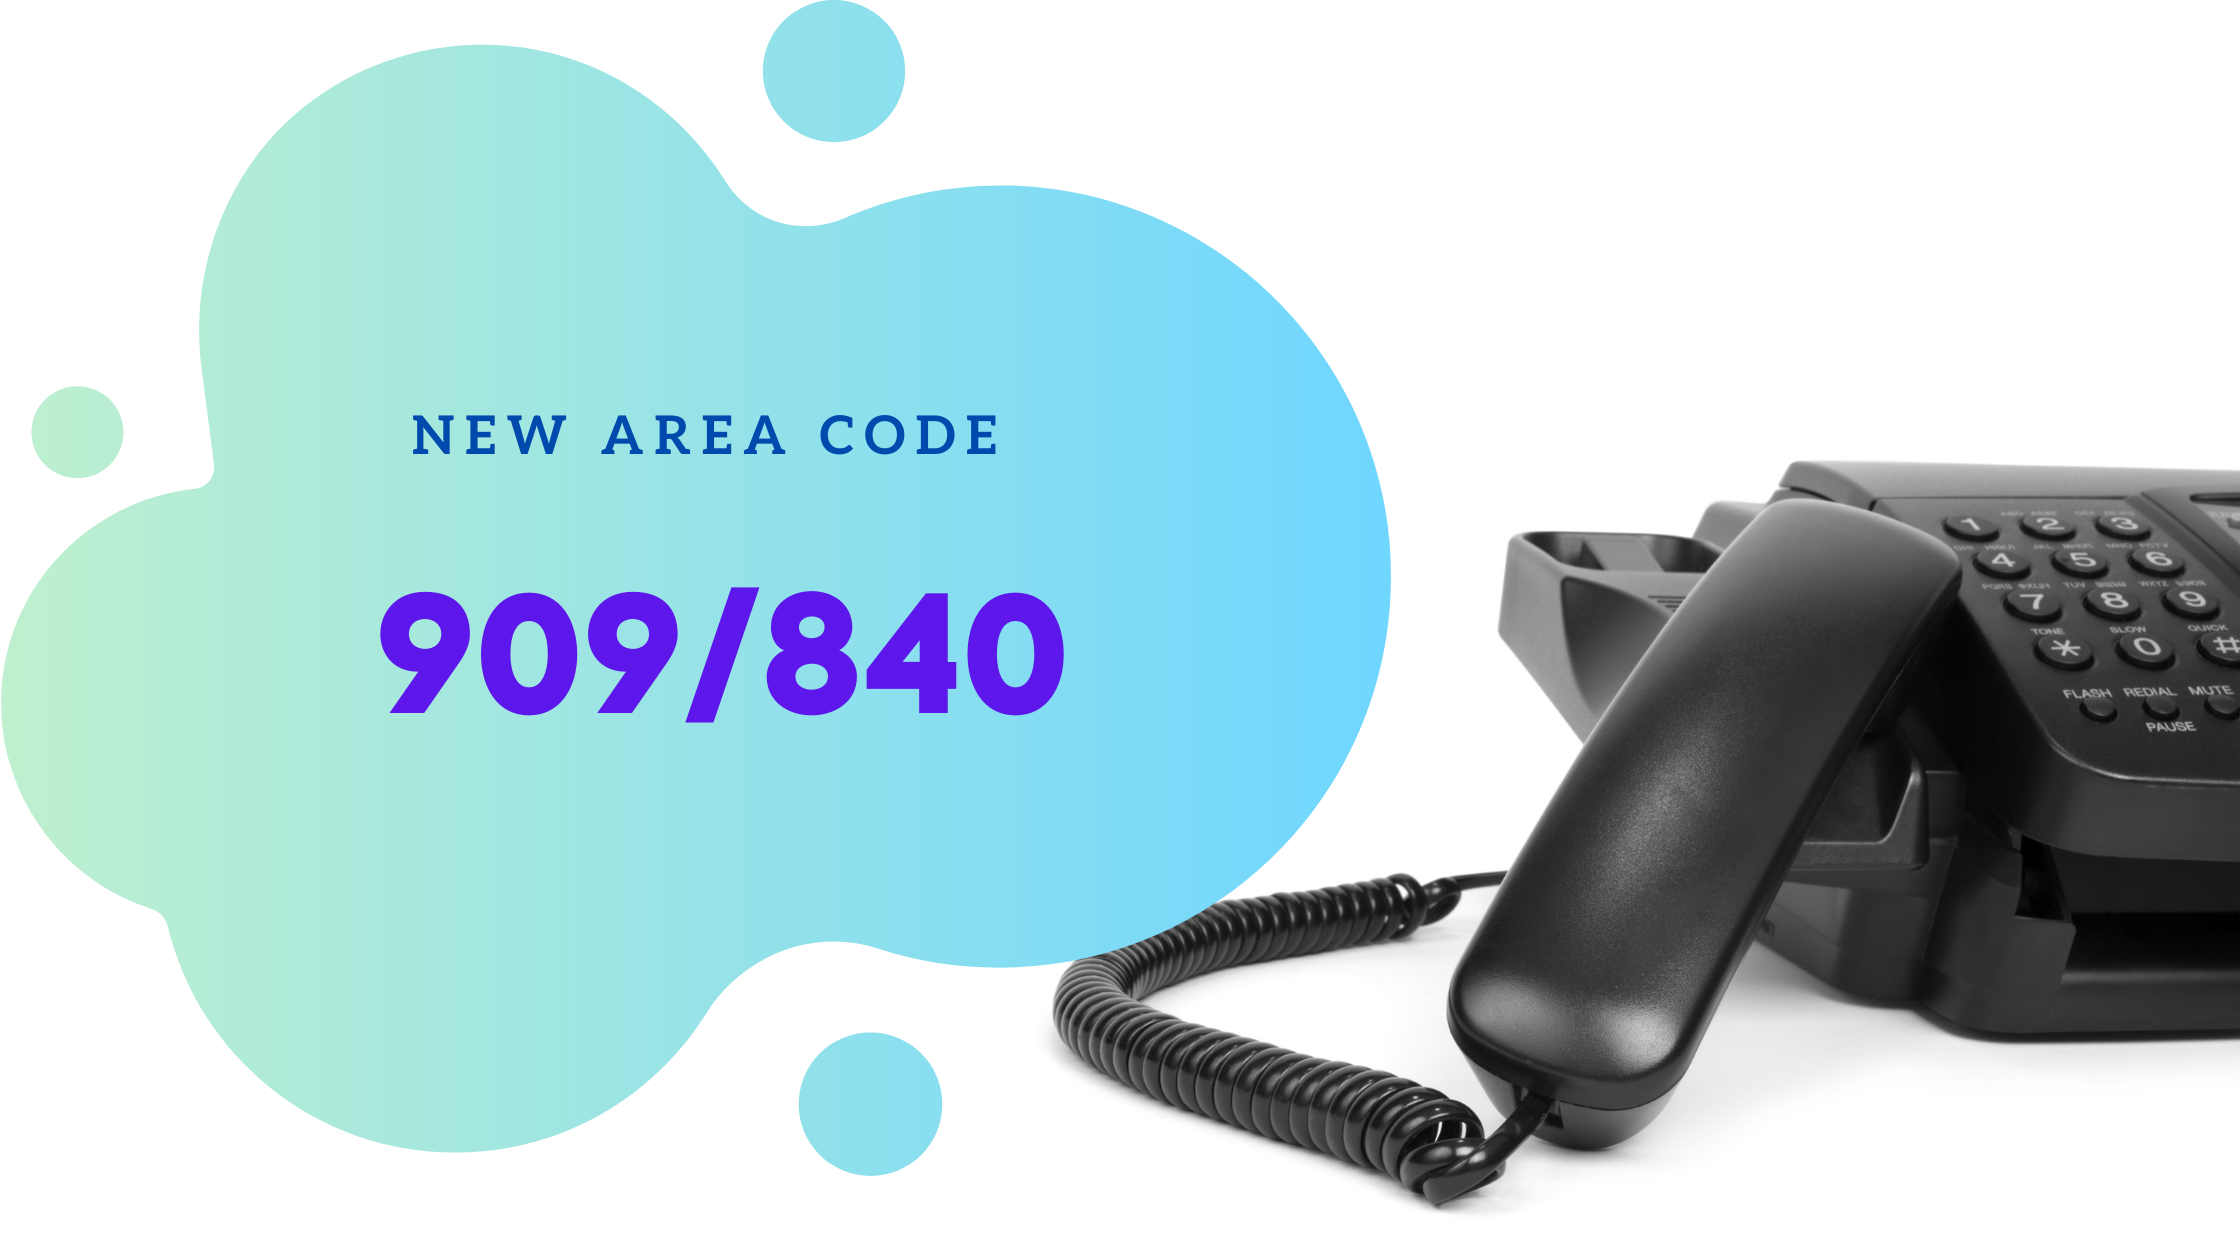 New area code 840 added to 909 region will go in affect in February